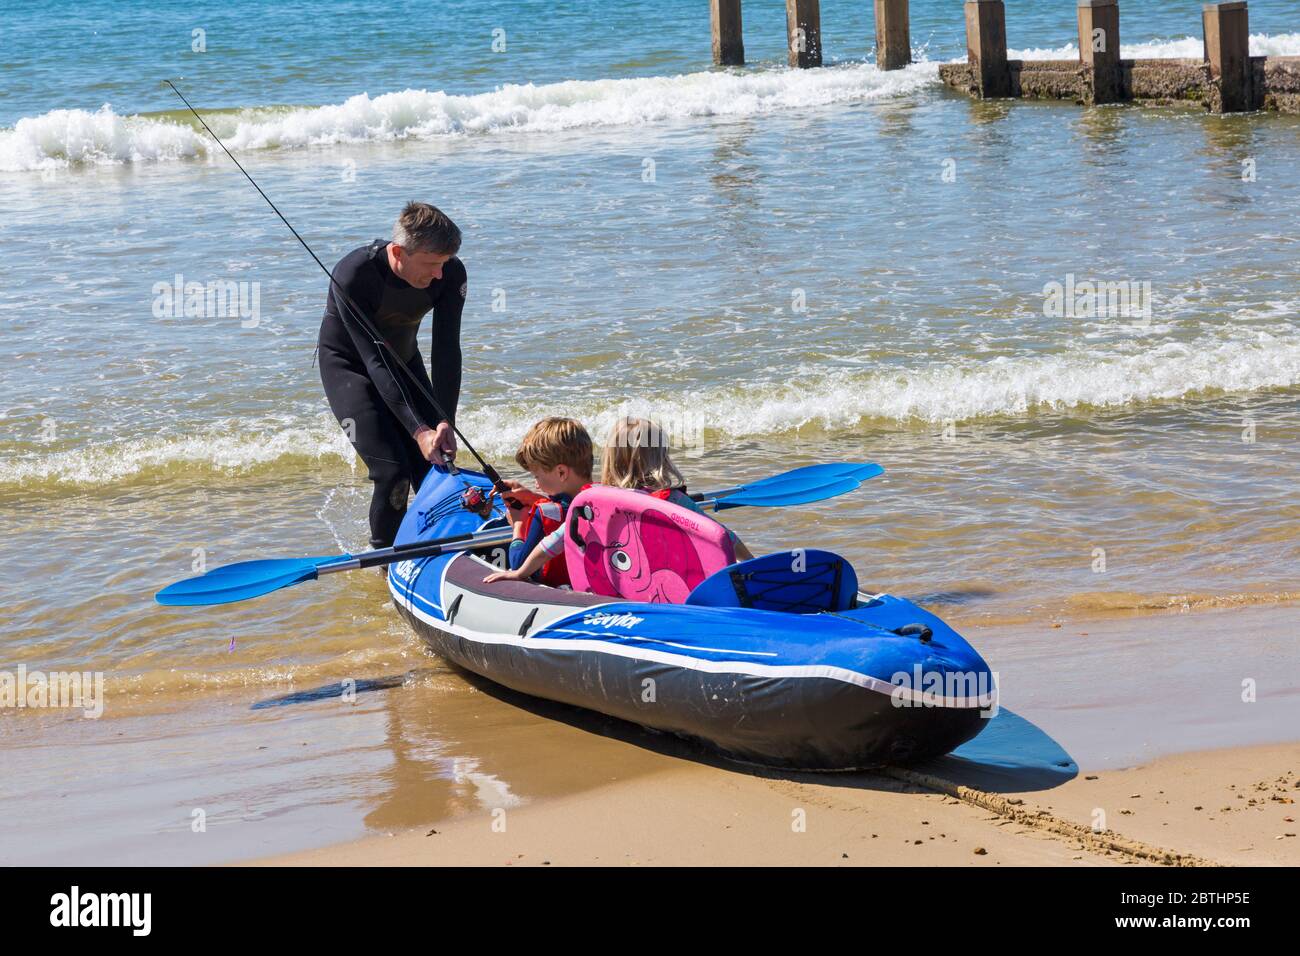 Bournemouth, Dorset UK. 26th May 2020. UK weather: another hot sunny day at Bournemouth beaches with clear blue skies and unbroken sunshine, as the glorious weather continues and temperatures rise. Sunseekers head to the seaside to enjoy the sunshine. Henry and Olivia, 6 and 5, go kayak fishing in the sea. Credit: Carolyn Jenkins/Alamy Live News Stock Photo